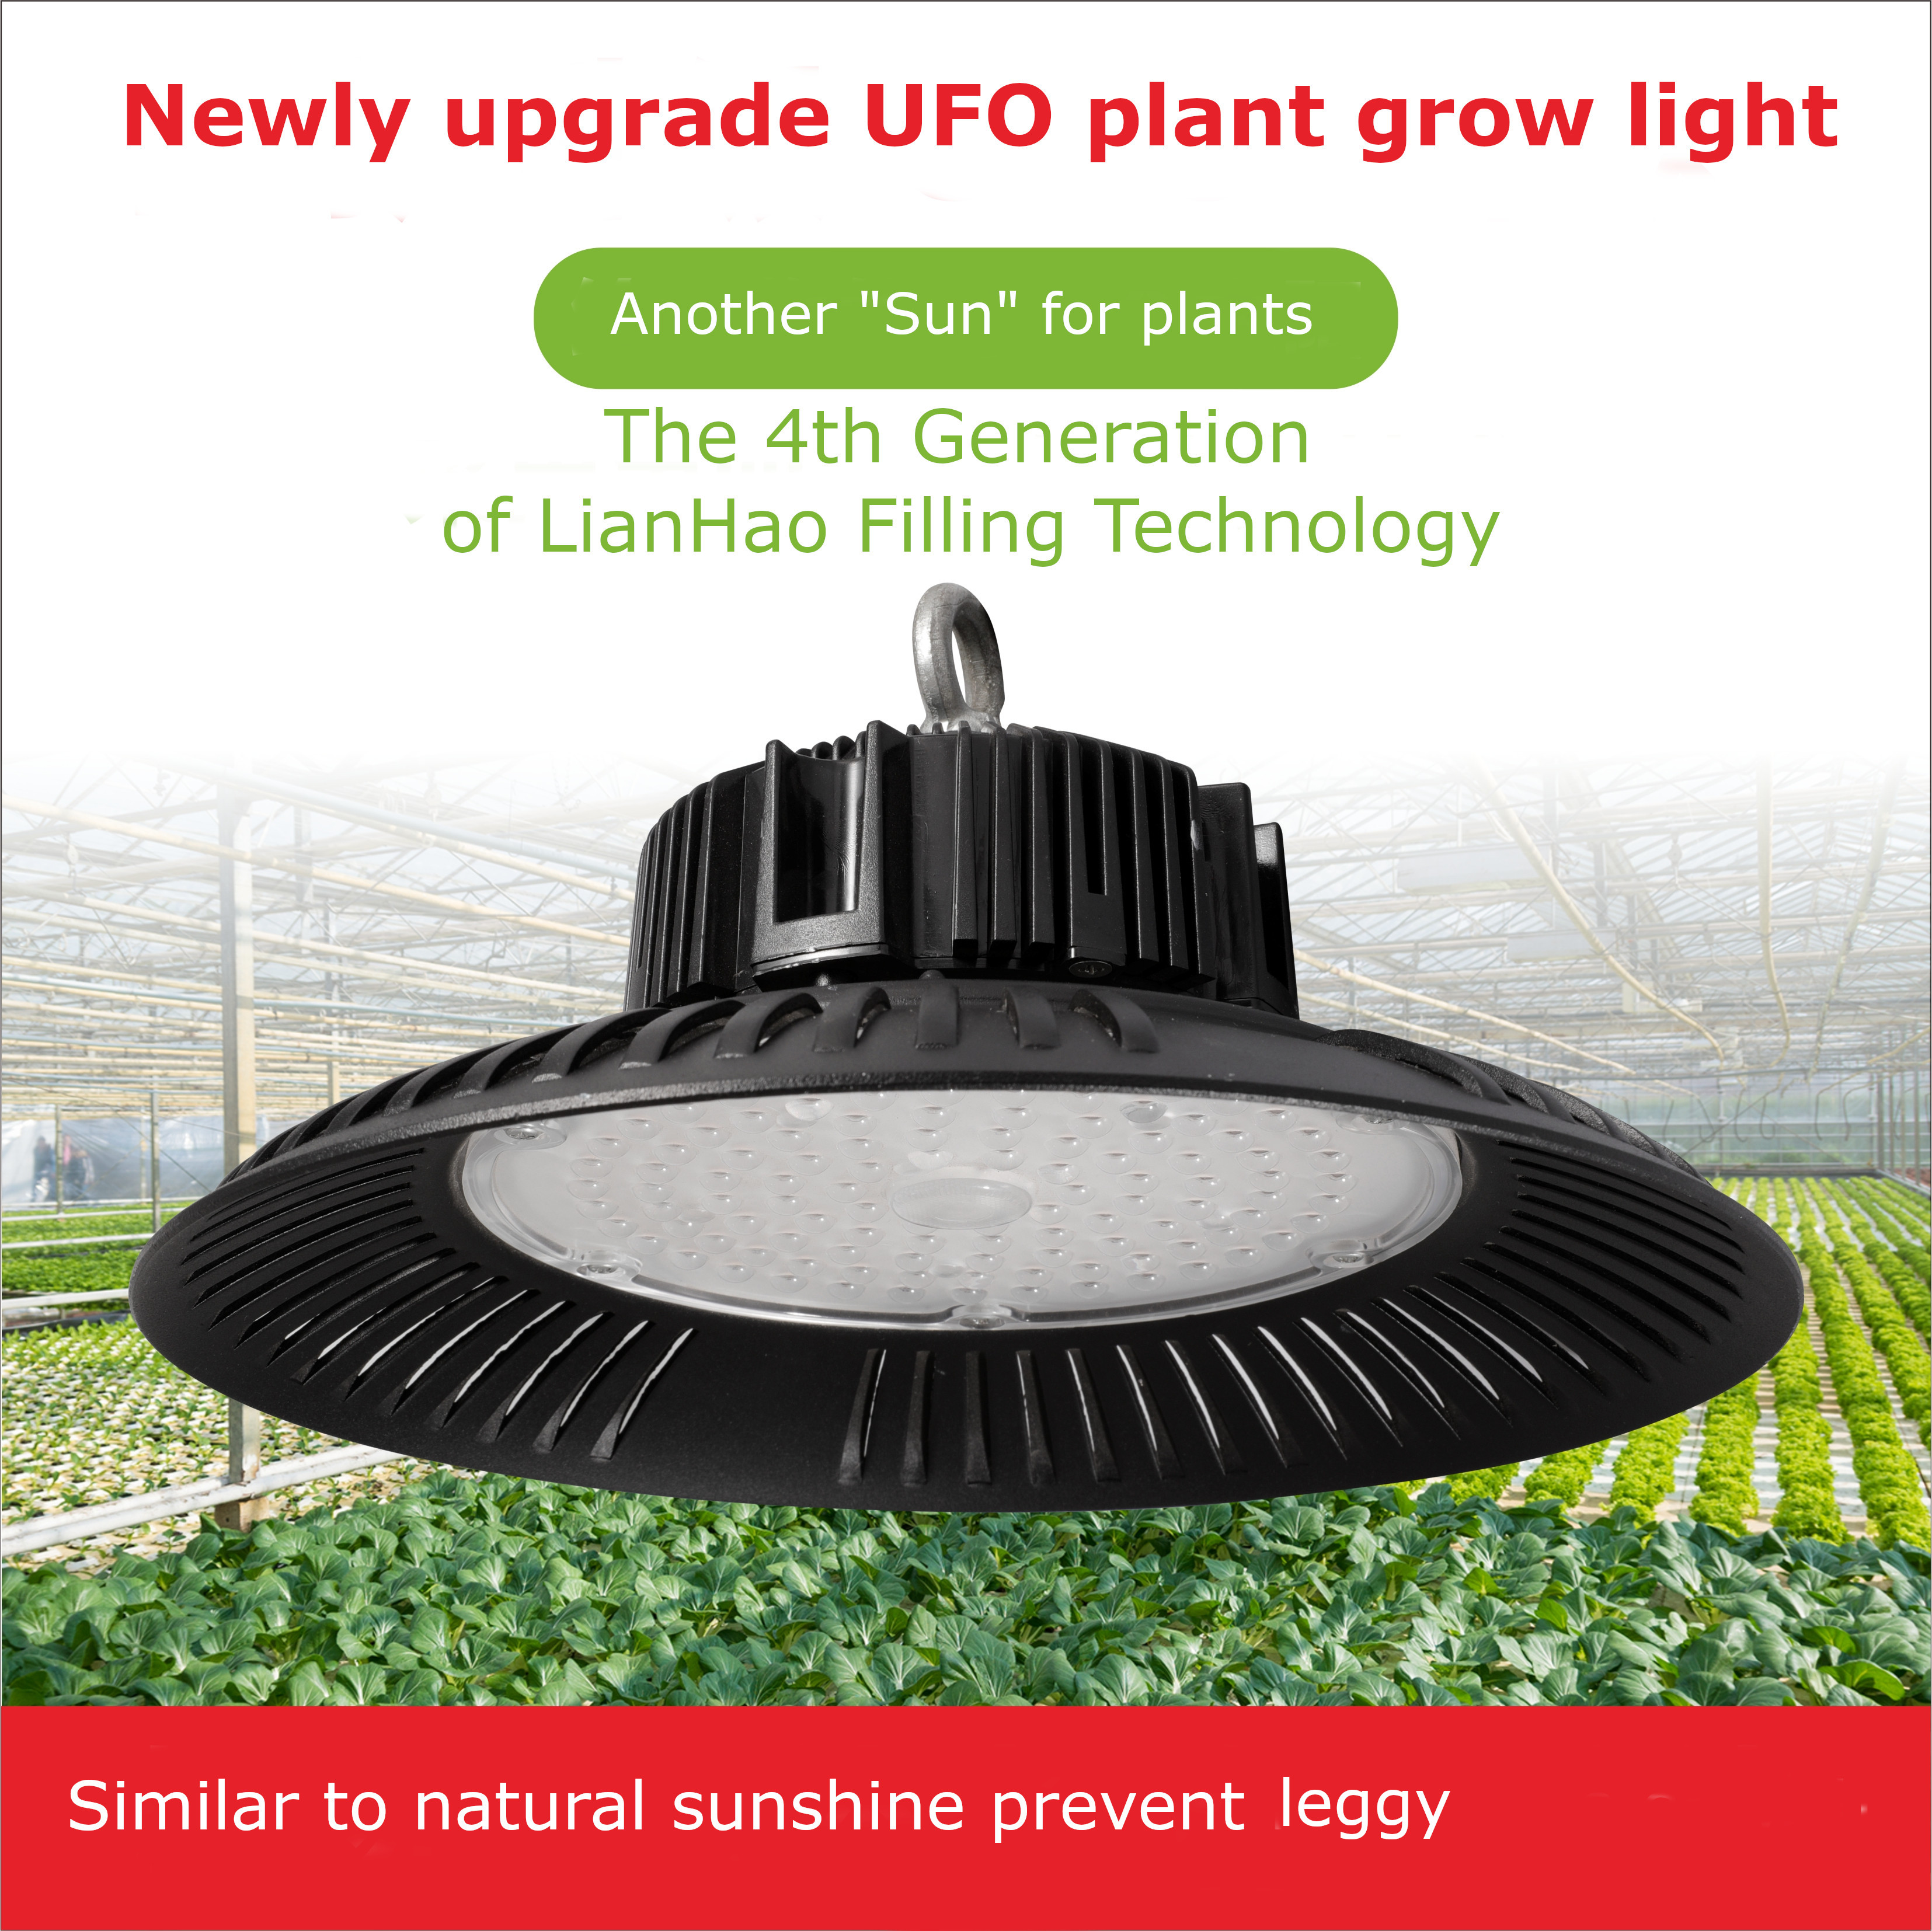 Led UFO plant grow light 100W with New Diodes & IR Lights Full Spectrum Veg Bloom Growing Lamps for Indoor Plants Seeding Flower Led Plant Light Fixture